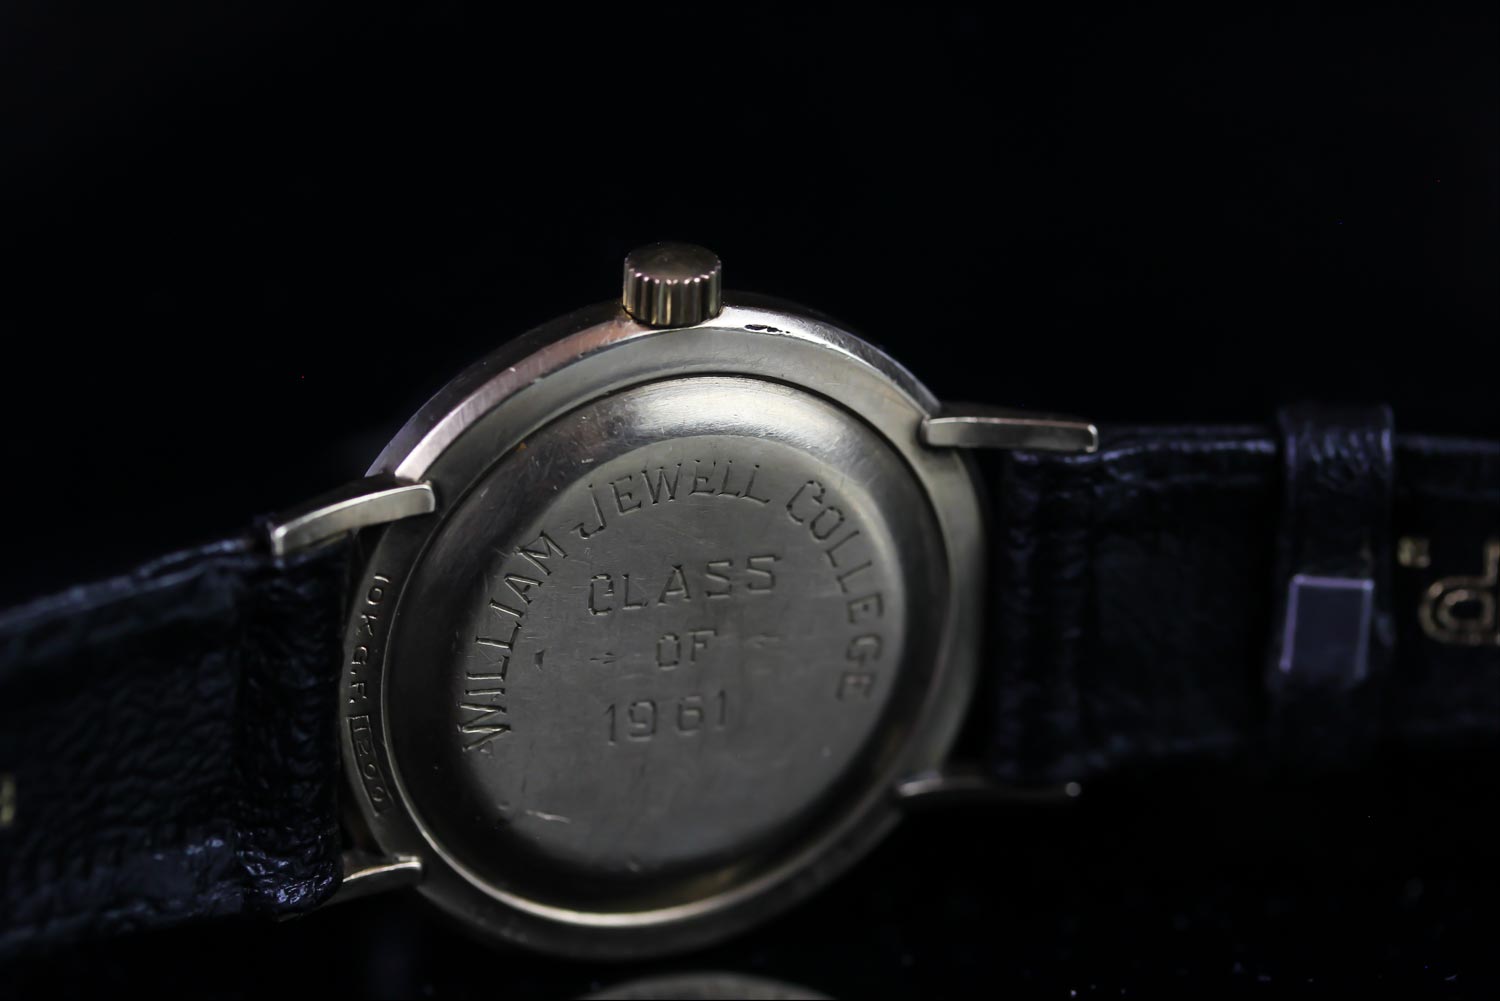 GENTLEMEN'S LONGINES ADMIRAL MANUAL WIND WRISTWATCH, circular silver dial with hour markers and - Image 3 of 3